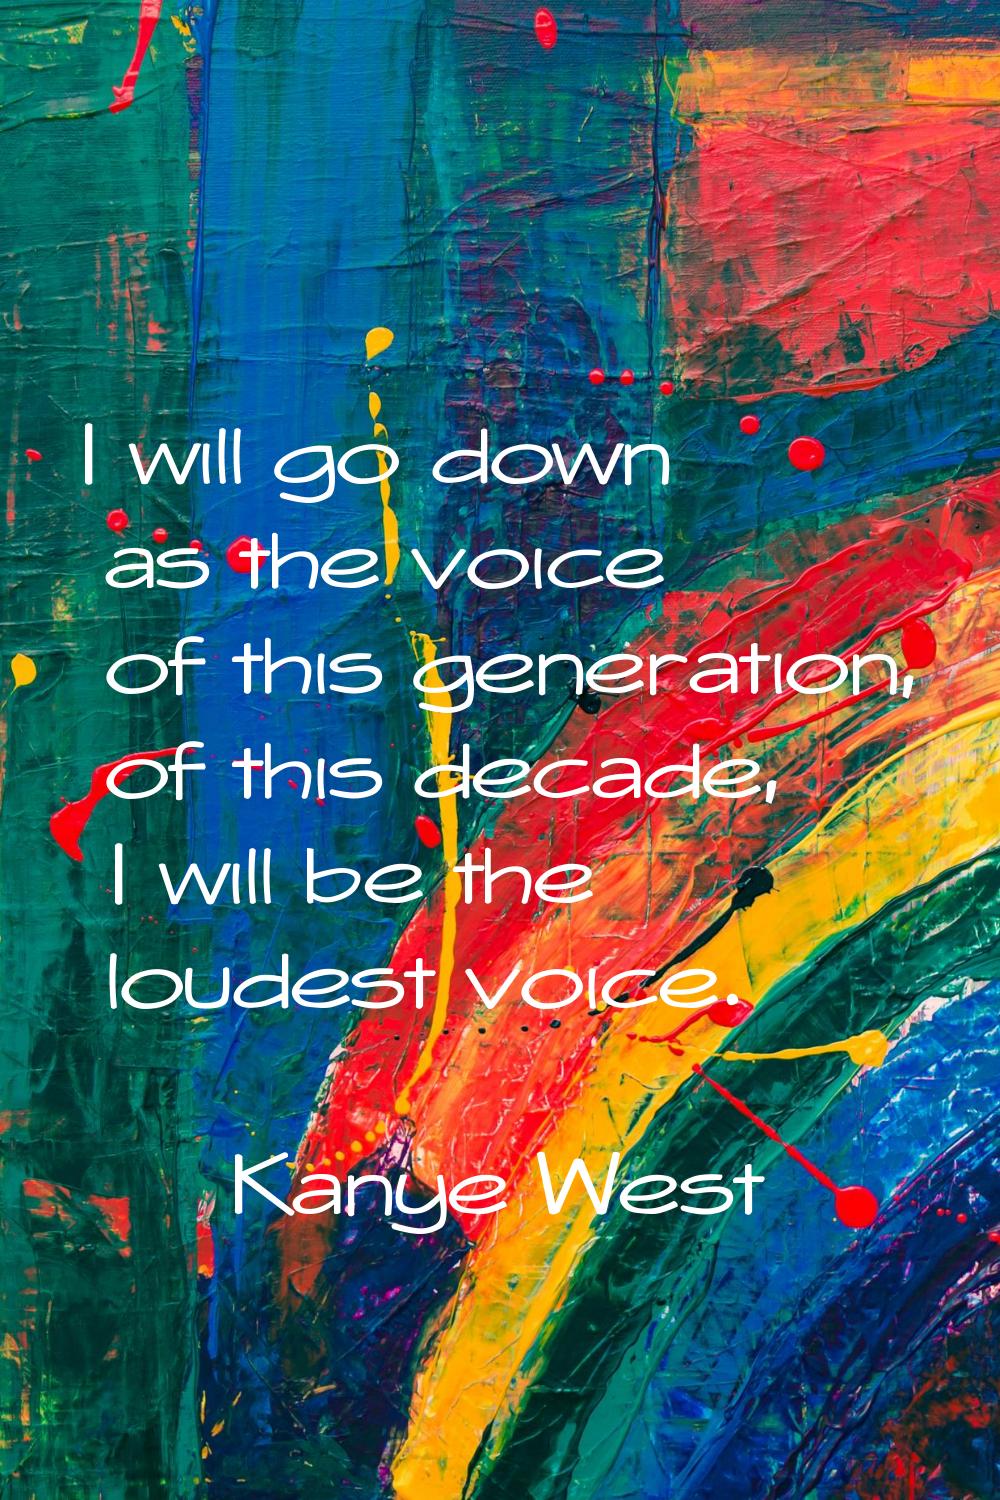 I will go down as the voice of this generation, of this decade, I will be the loudest voice.